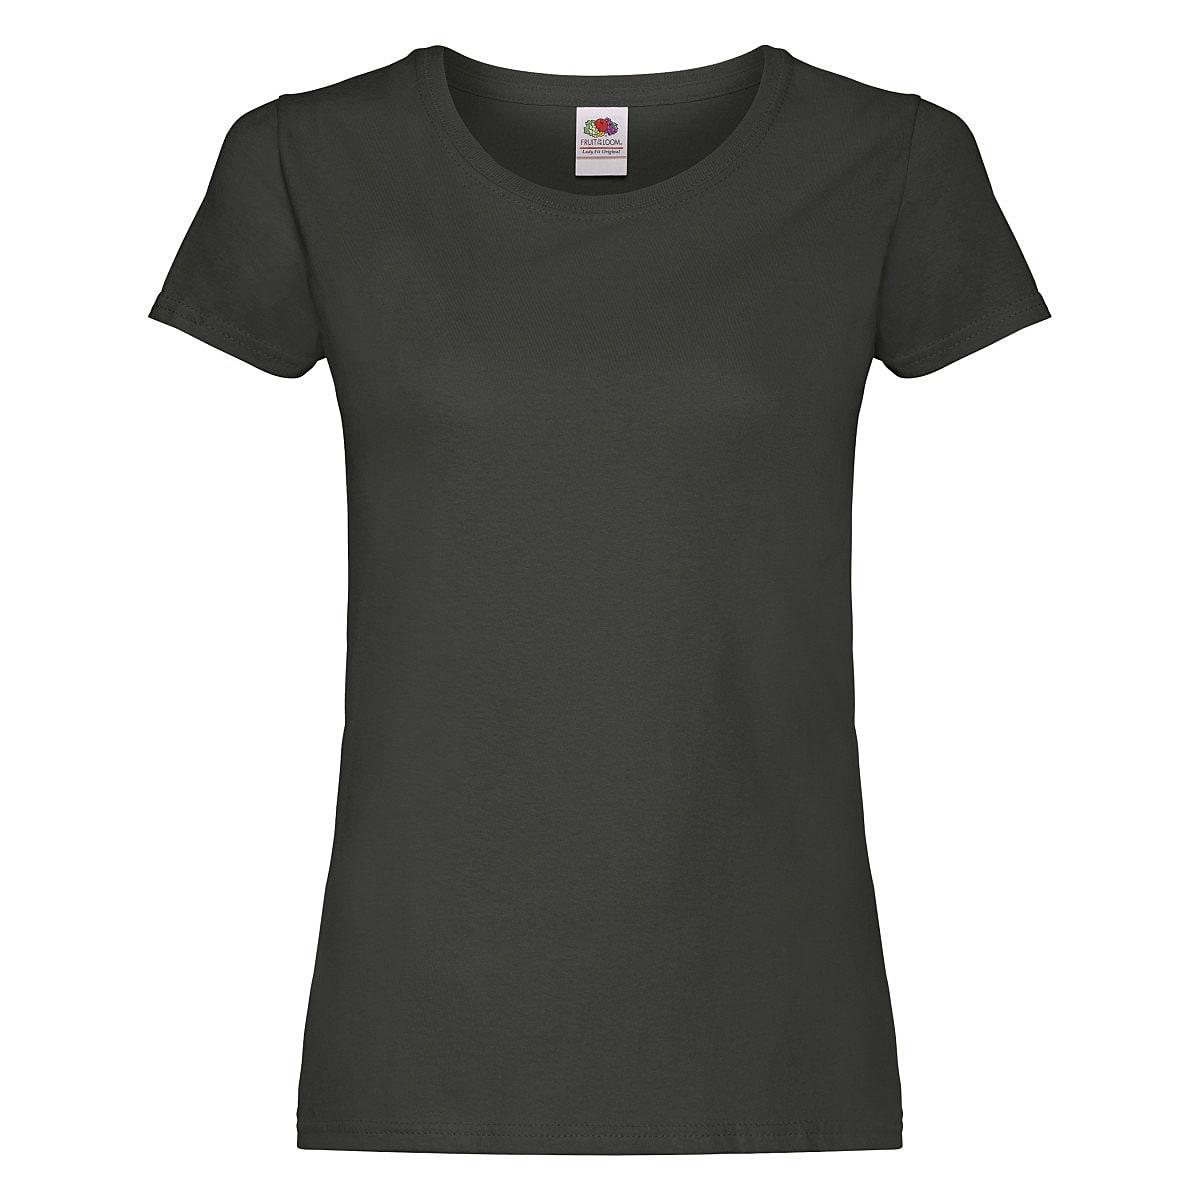 Fruit Of The Loom Lady Fit Original T-Shirt in Light Graphite (Product Code: 61420)